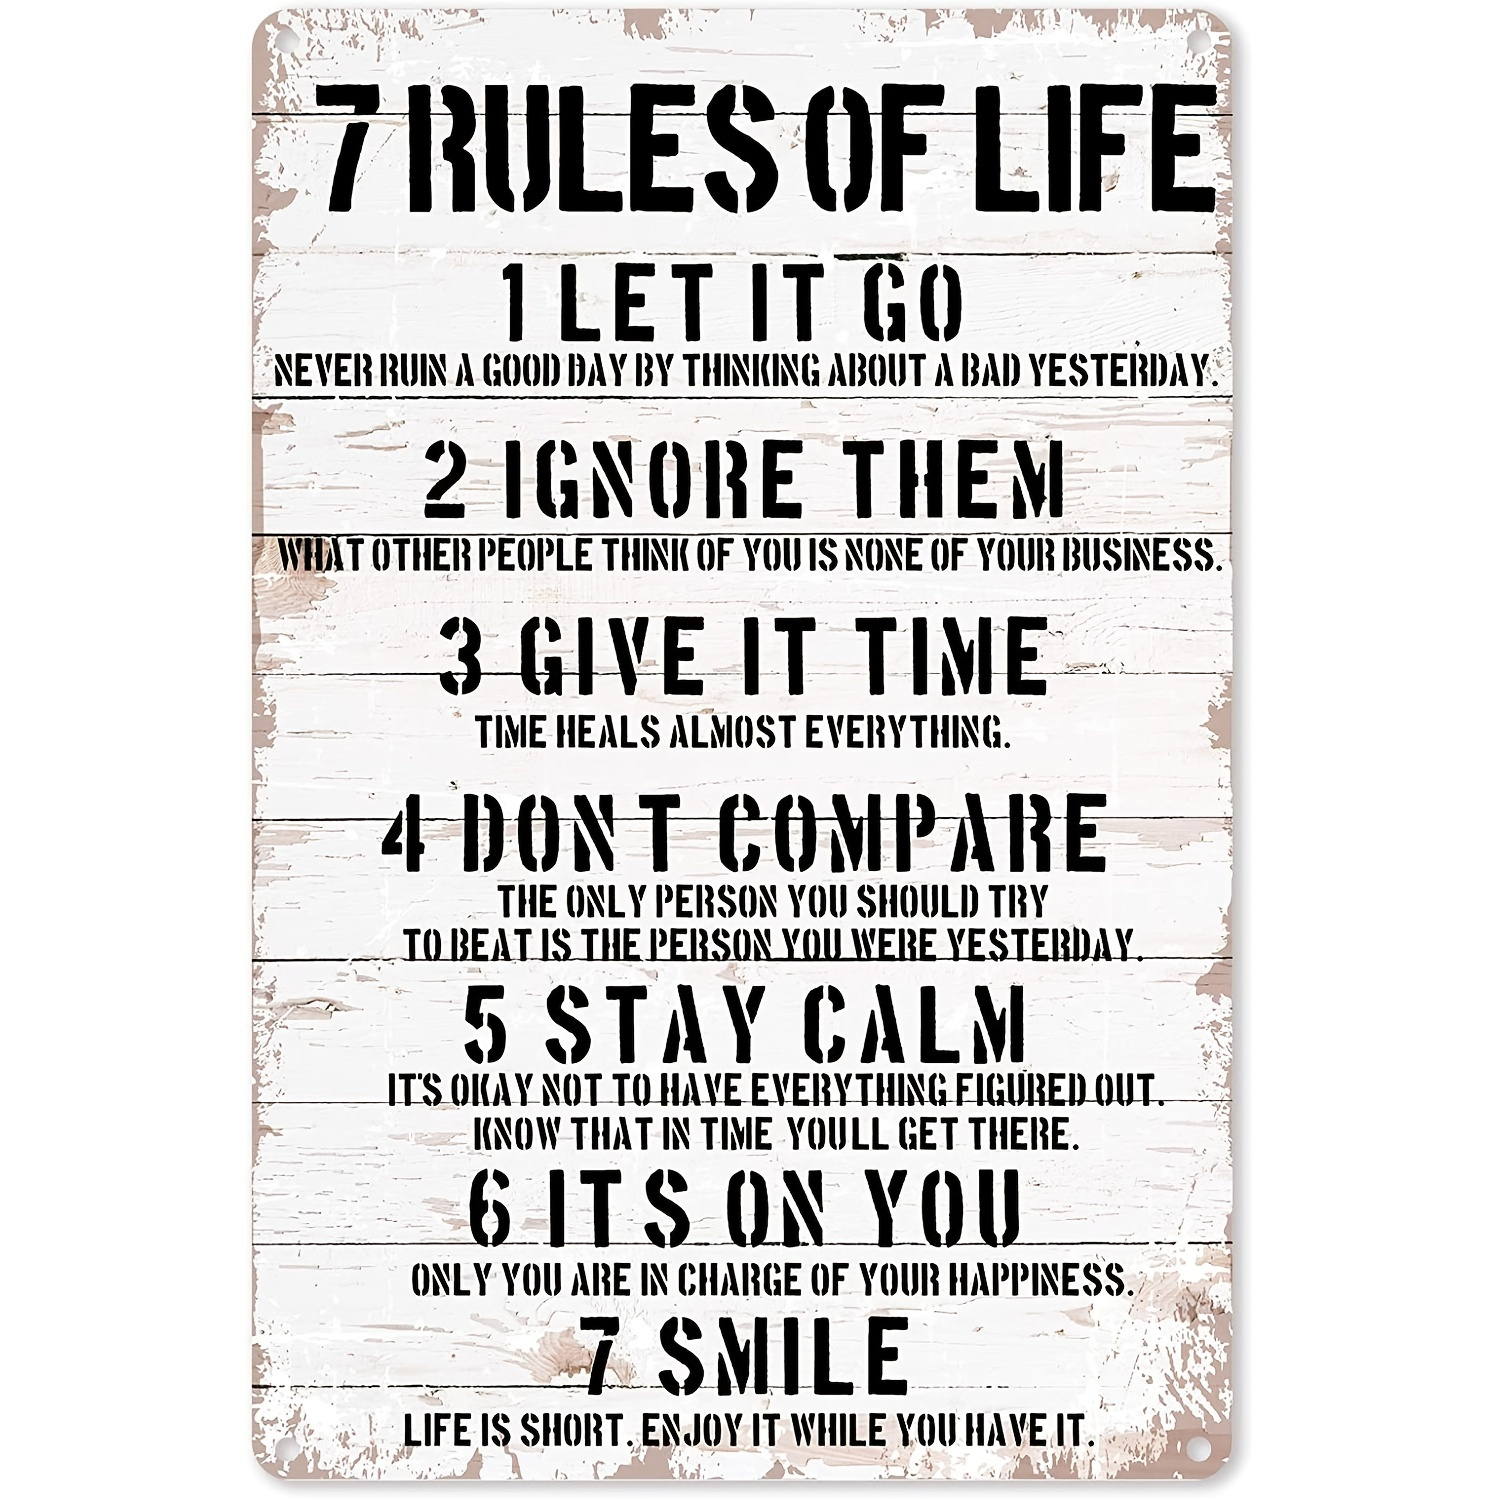 

1pc, 7 Rules Of Life Motivational Quote Metal Tin Sign - Vintage Wall Decor For Office, Home, Classroom - Perfect Birthday, Thanksgiving, Christmas Gift